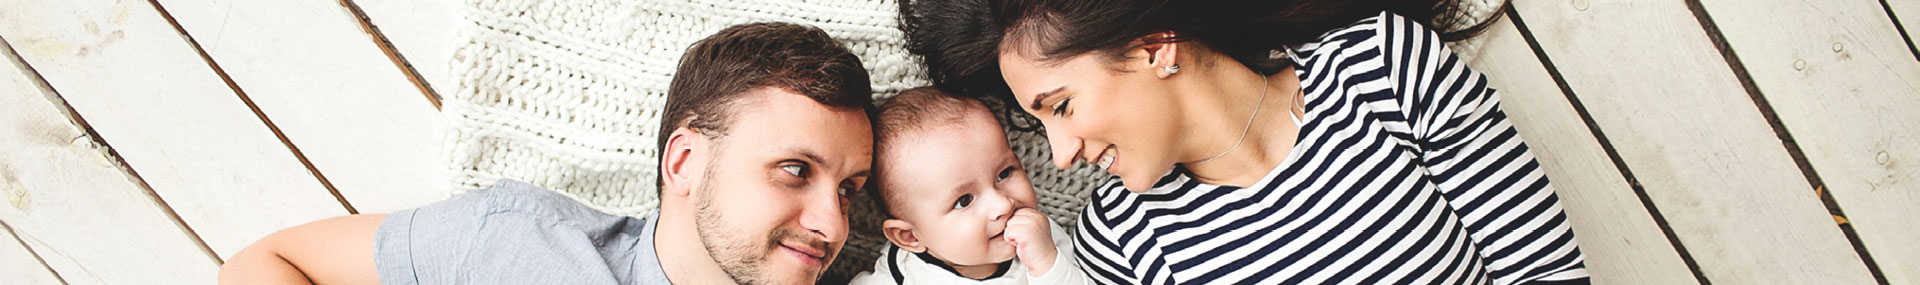 Husband and wife lay on the floor and smile at the baby between them